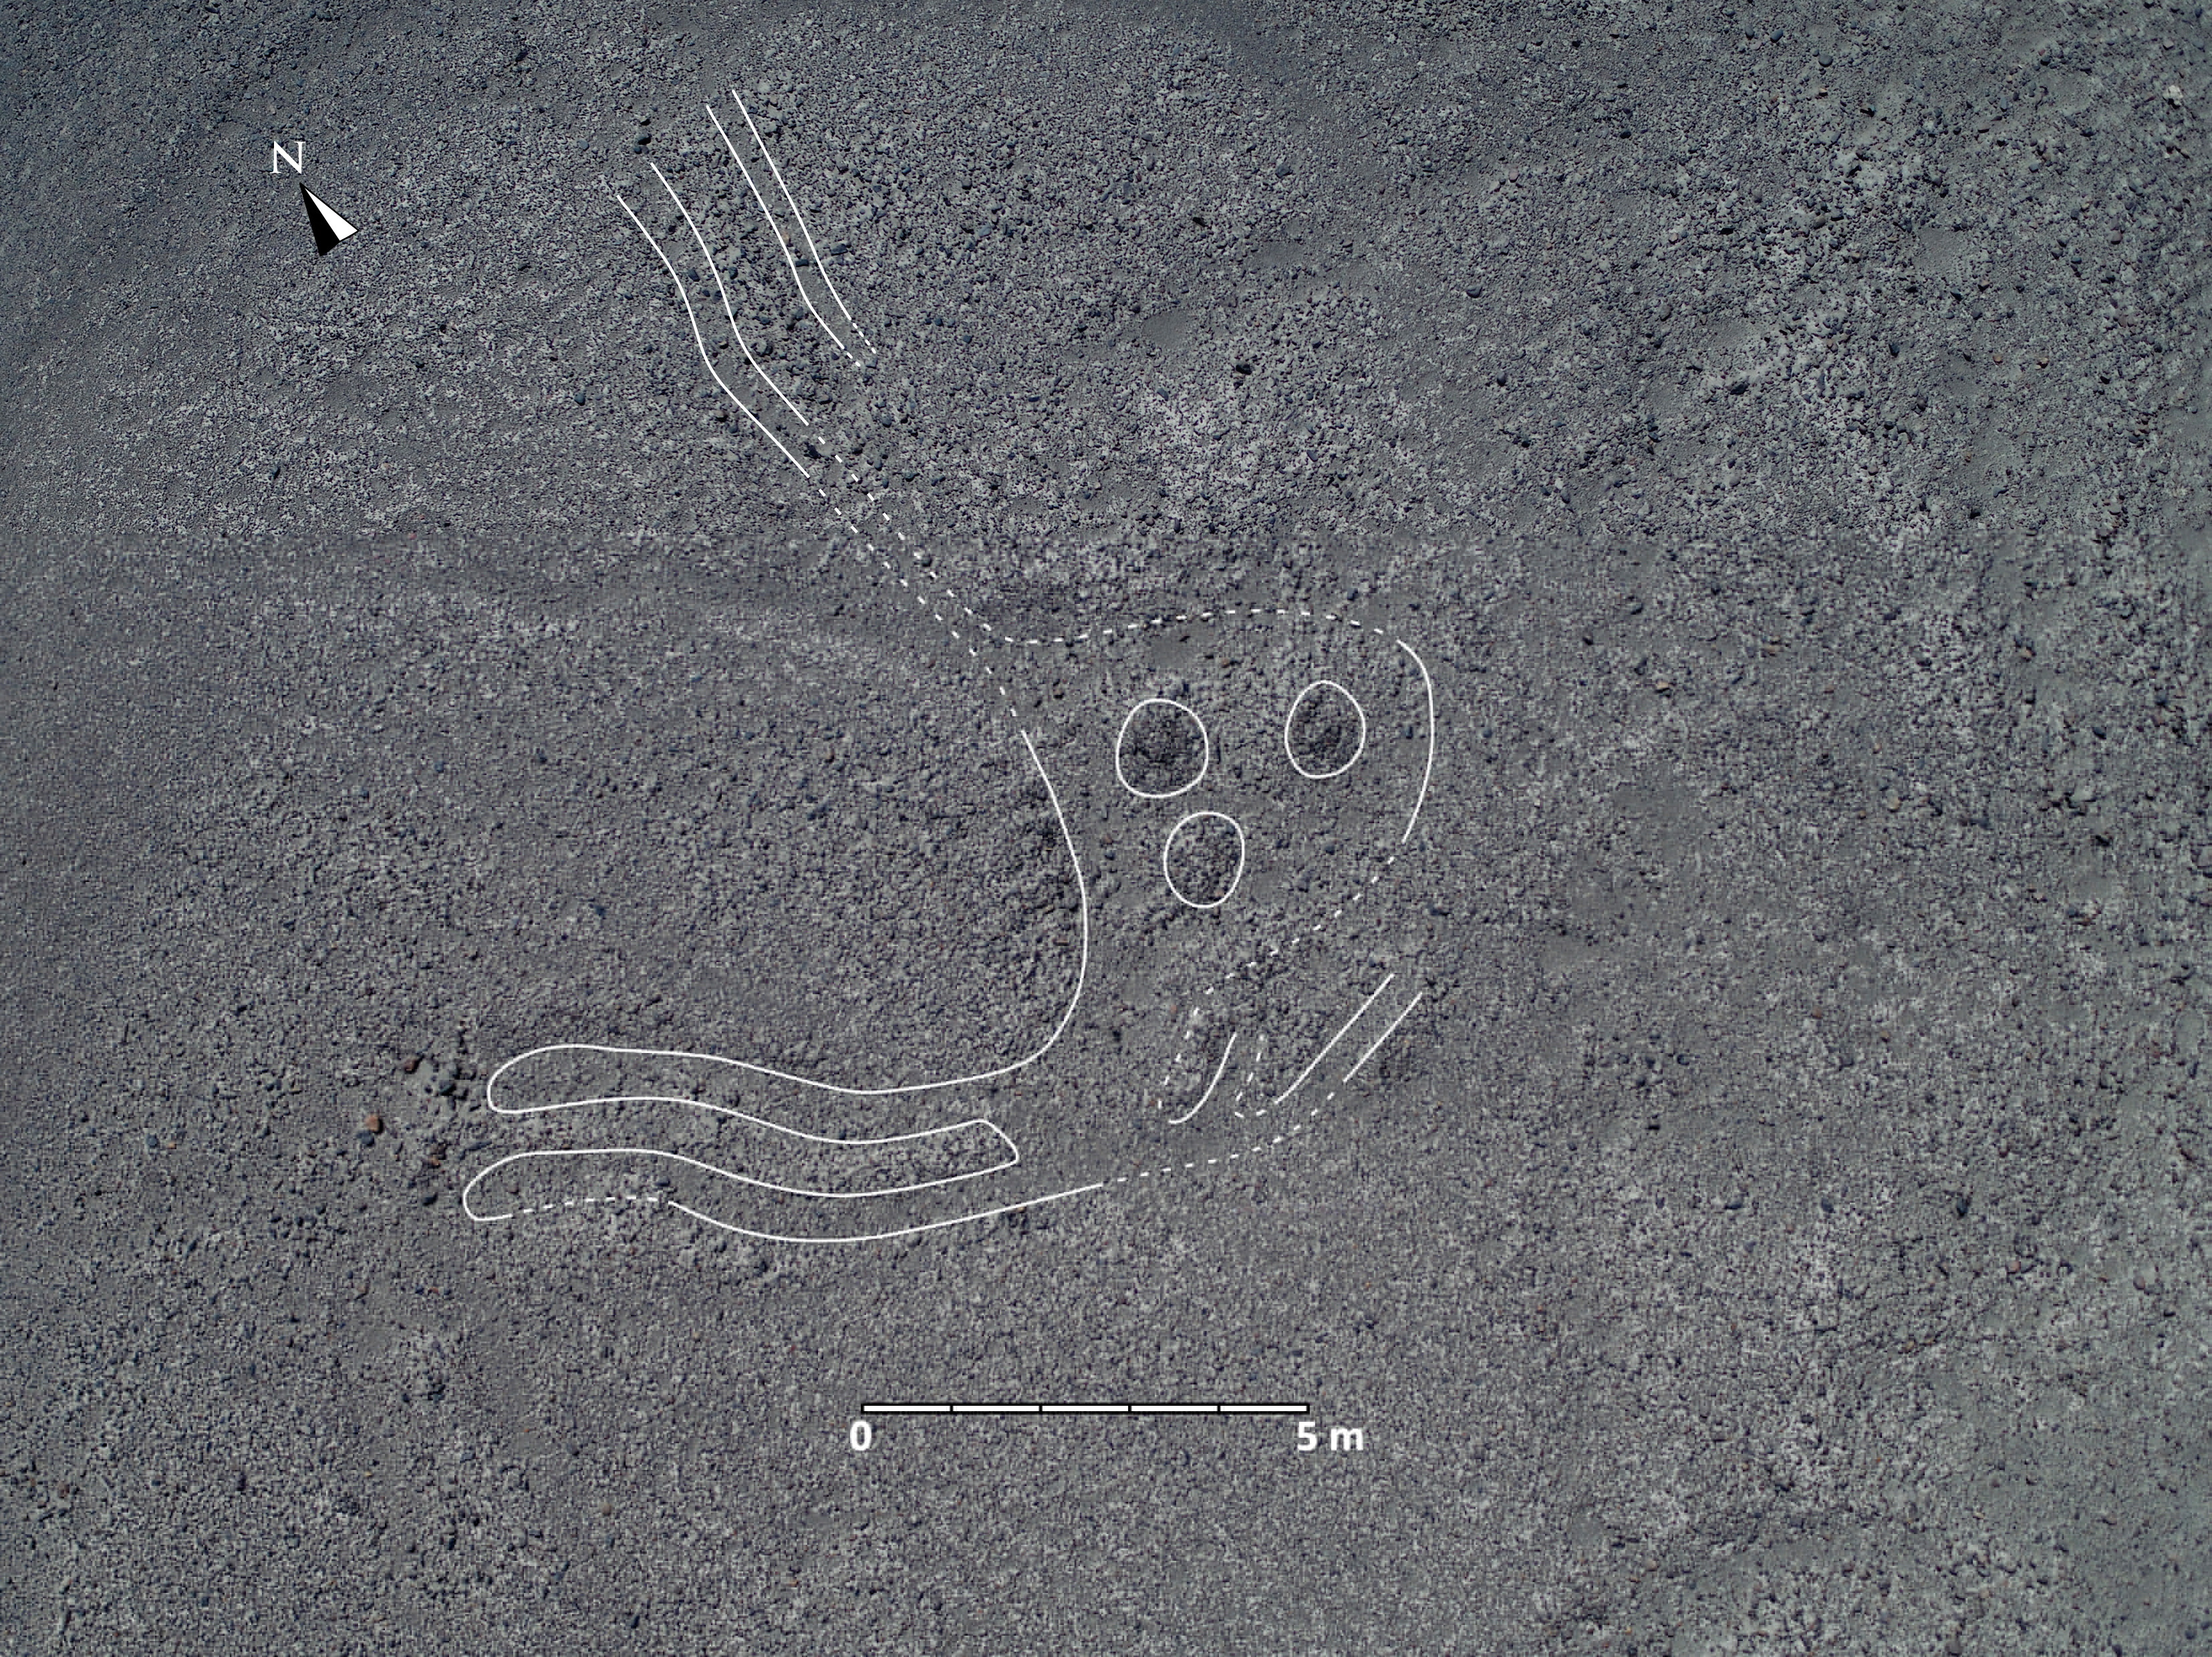 Researchers discover over 100 new ancient designs in Peru's Nazca lines